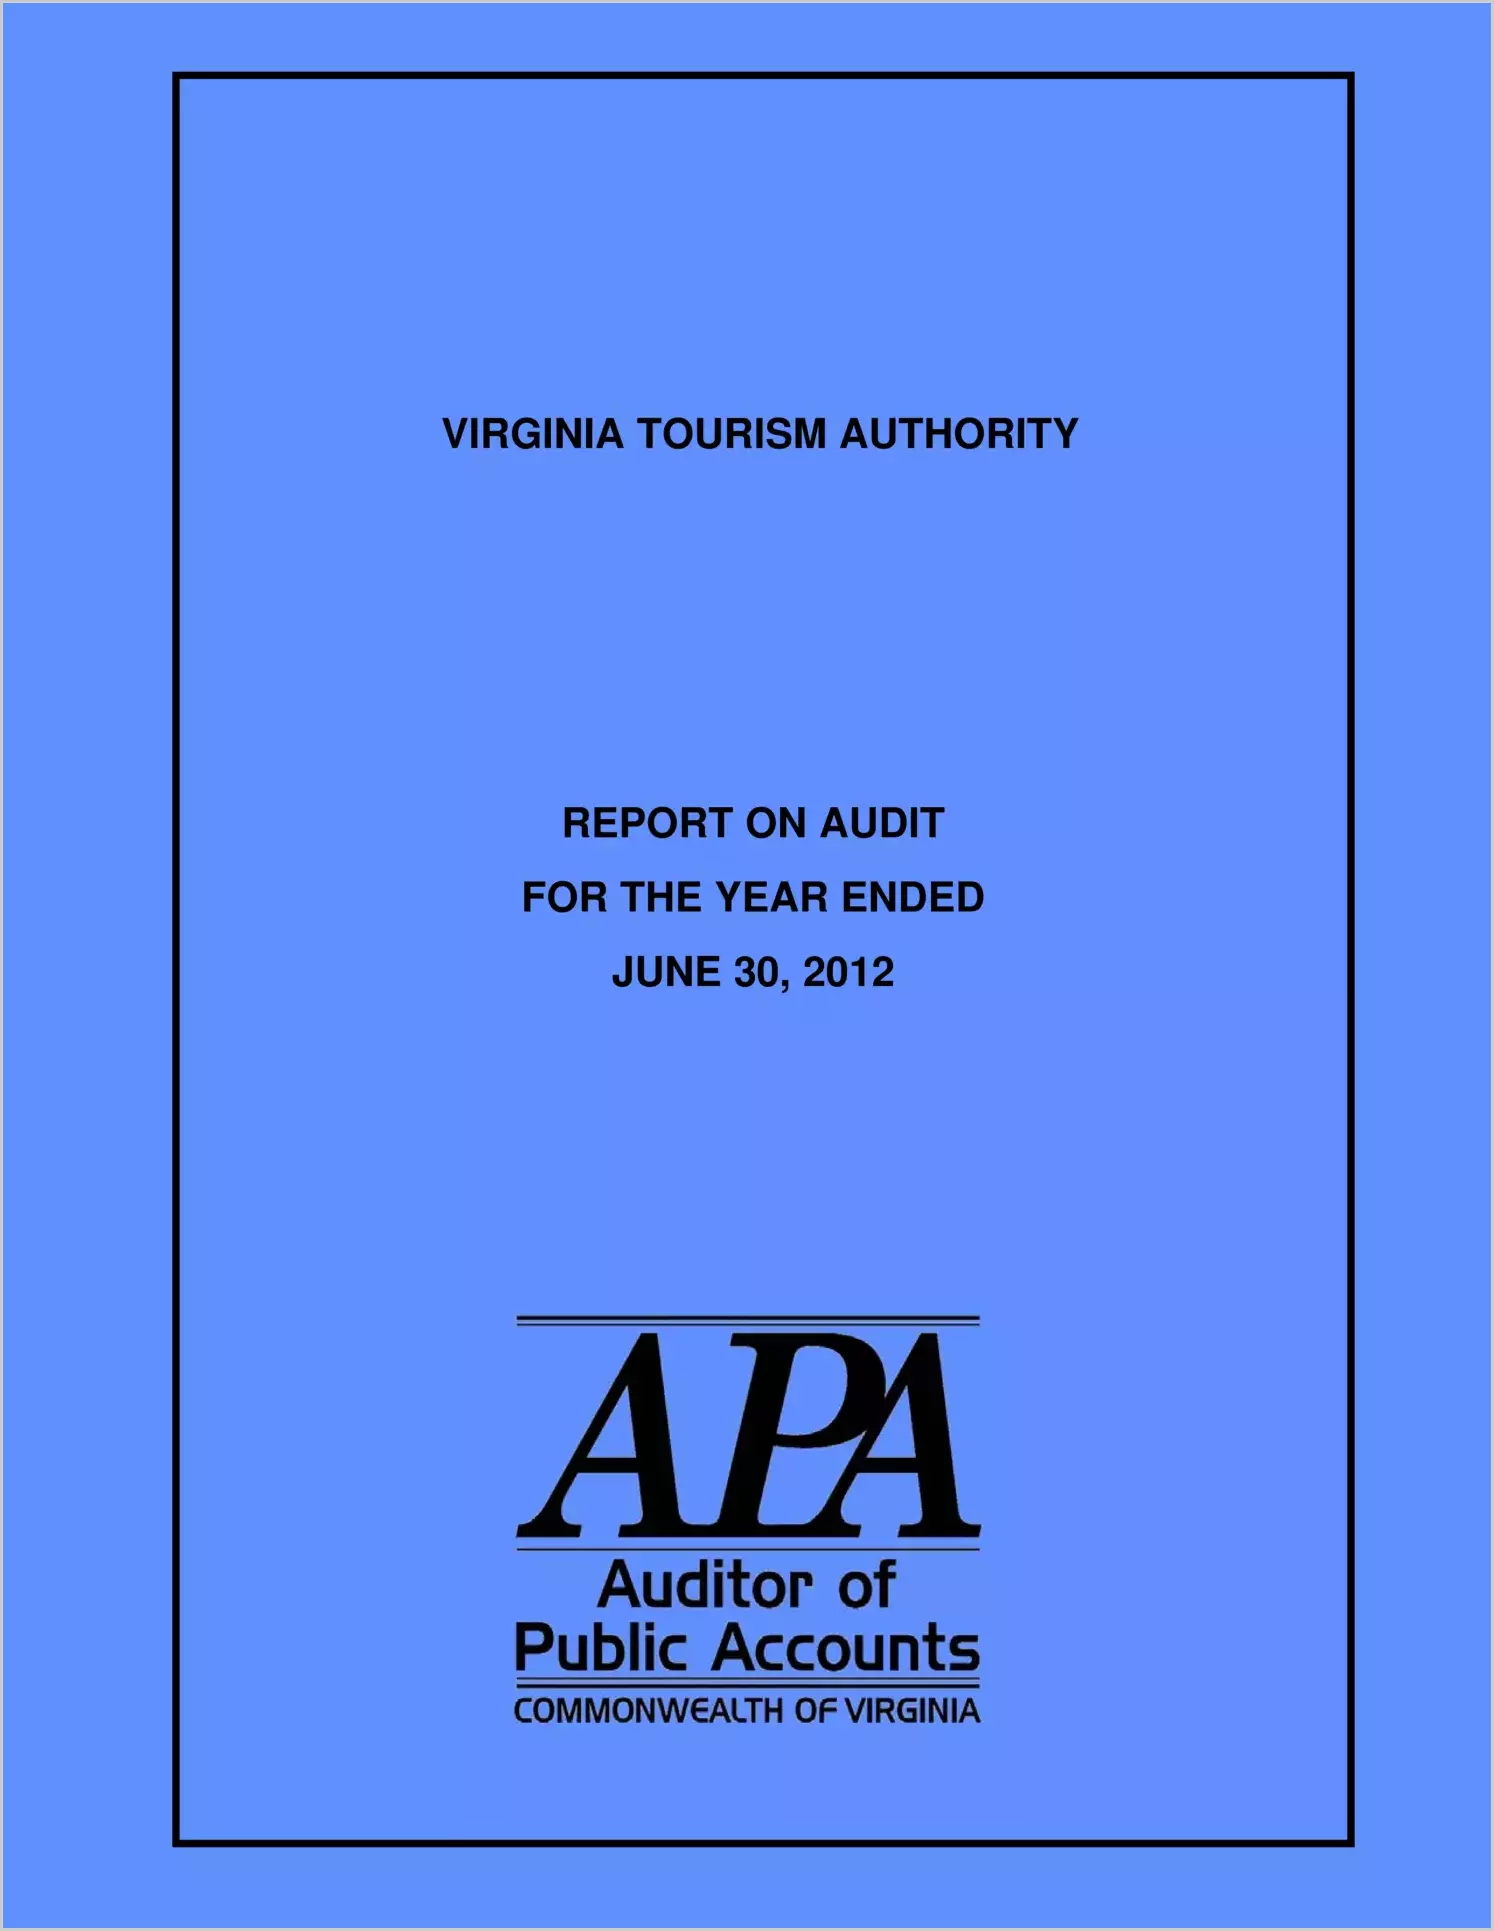 Virginia Tourism Authority for the year ended June 30, 2012